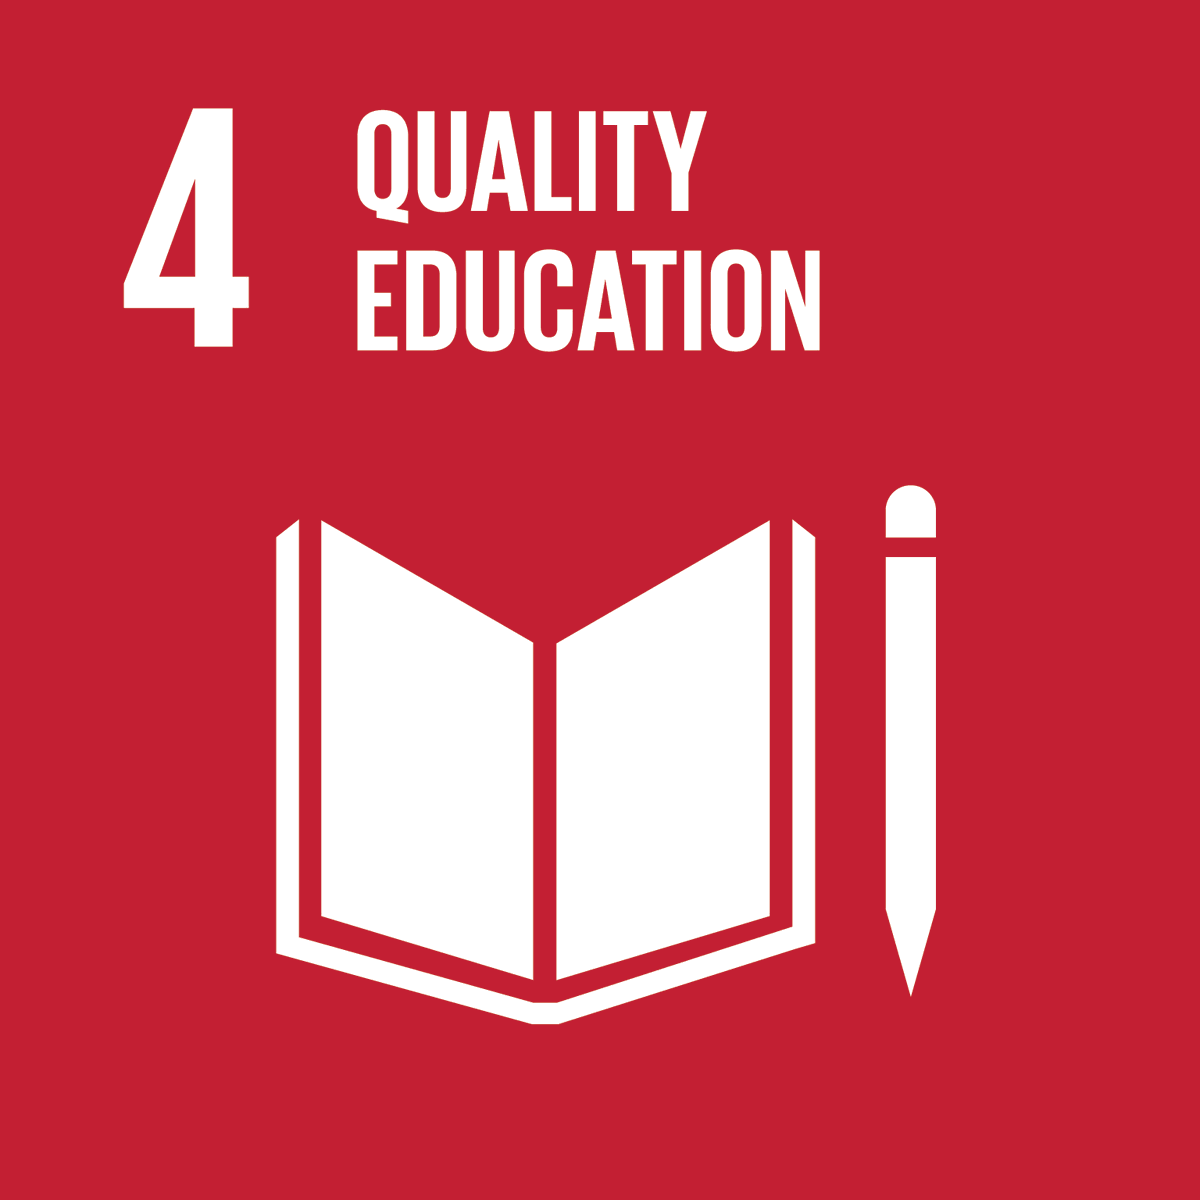 Goal 4: Quality educationShe always says we want educate children in the same way with no difference In gender. Wants to tell them what is right and what is wrong.